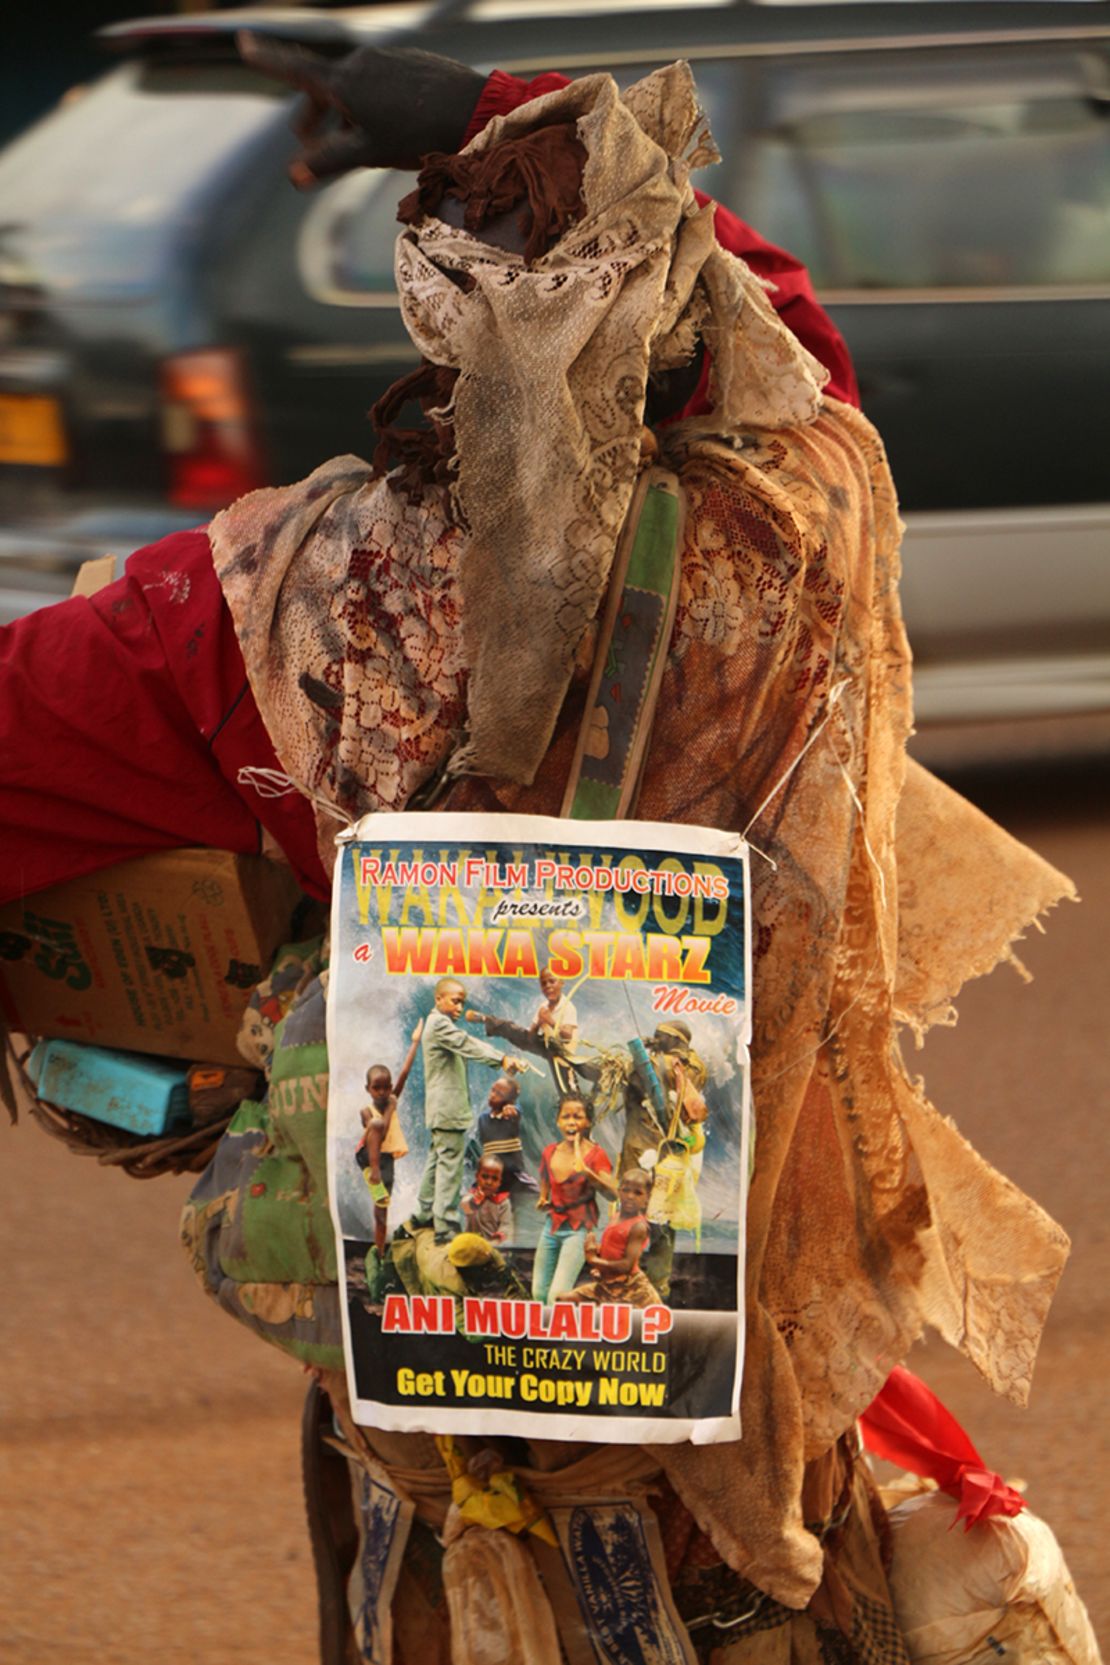 Sometimes Wakaliwood actors get into character to gain some extra attention while selling the films.